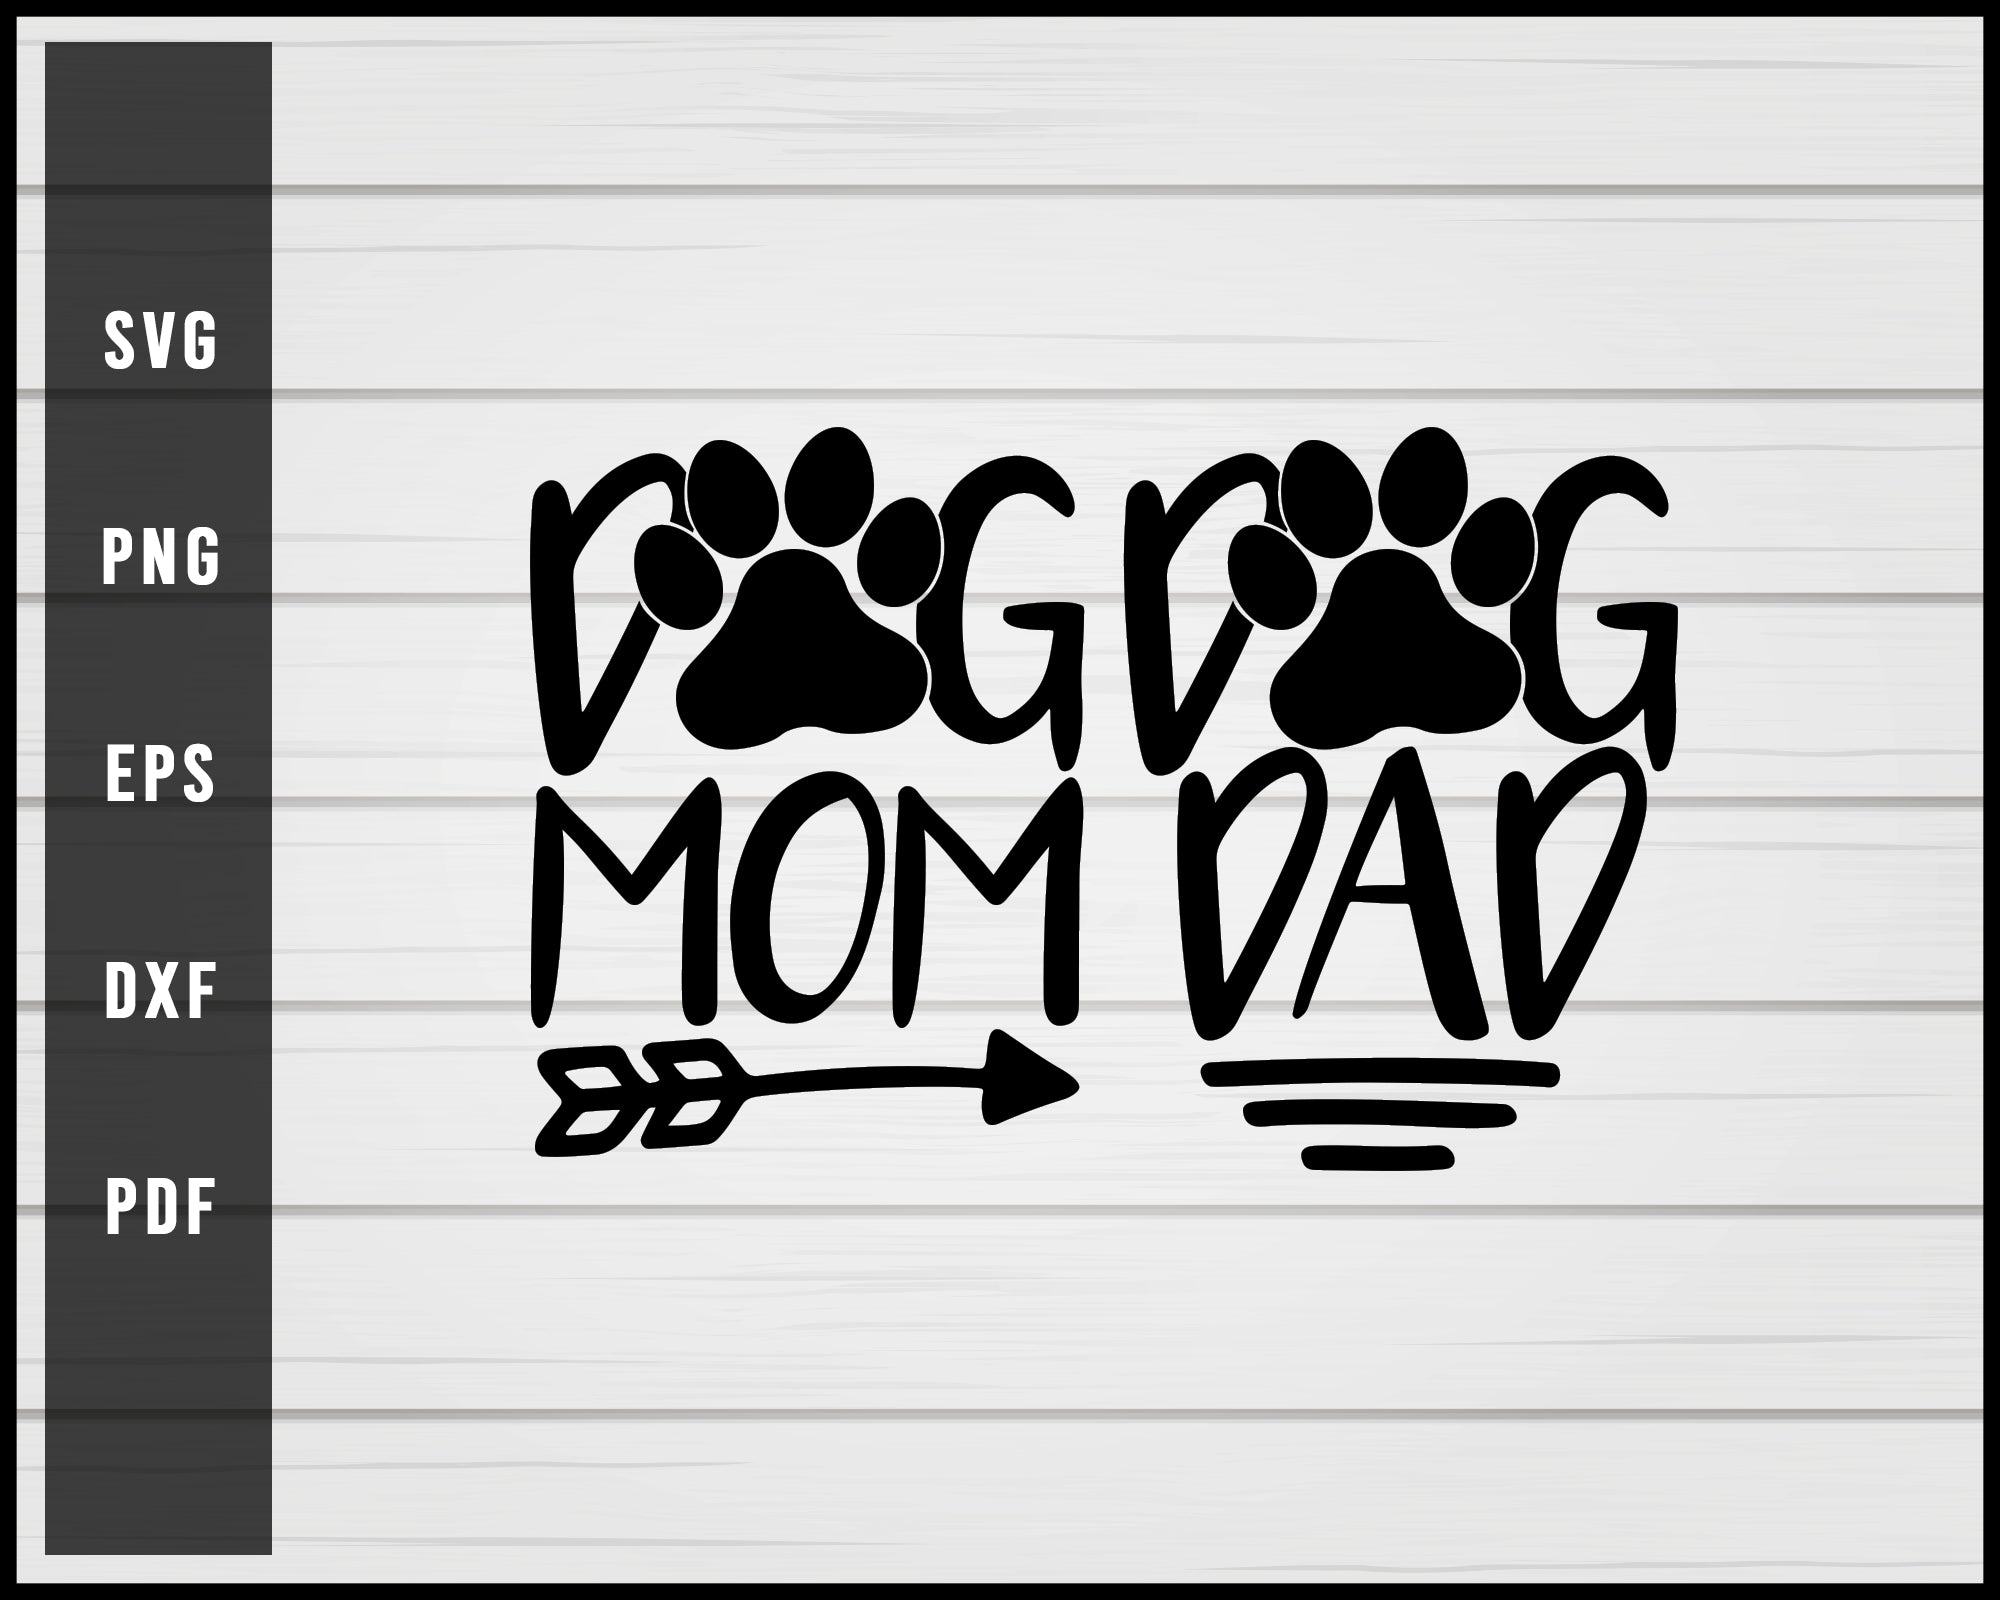 Dog Mom and Dad svg png Silhouette Designs For Cricut And Printable Files